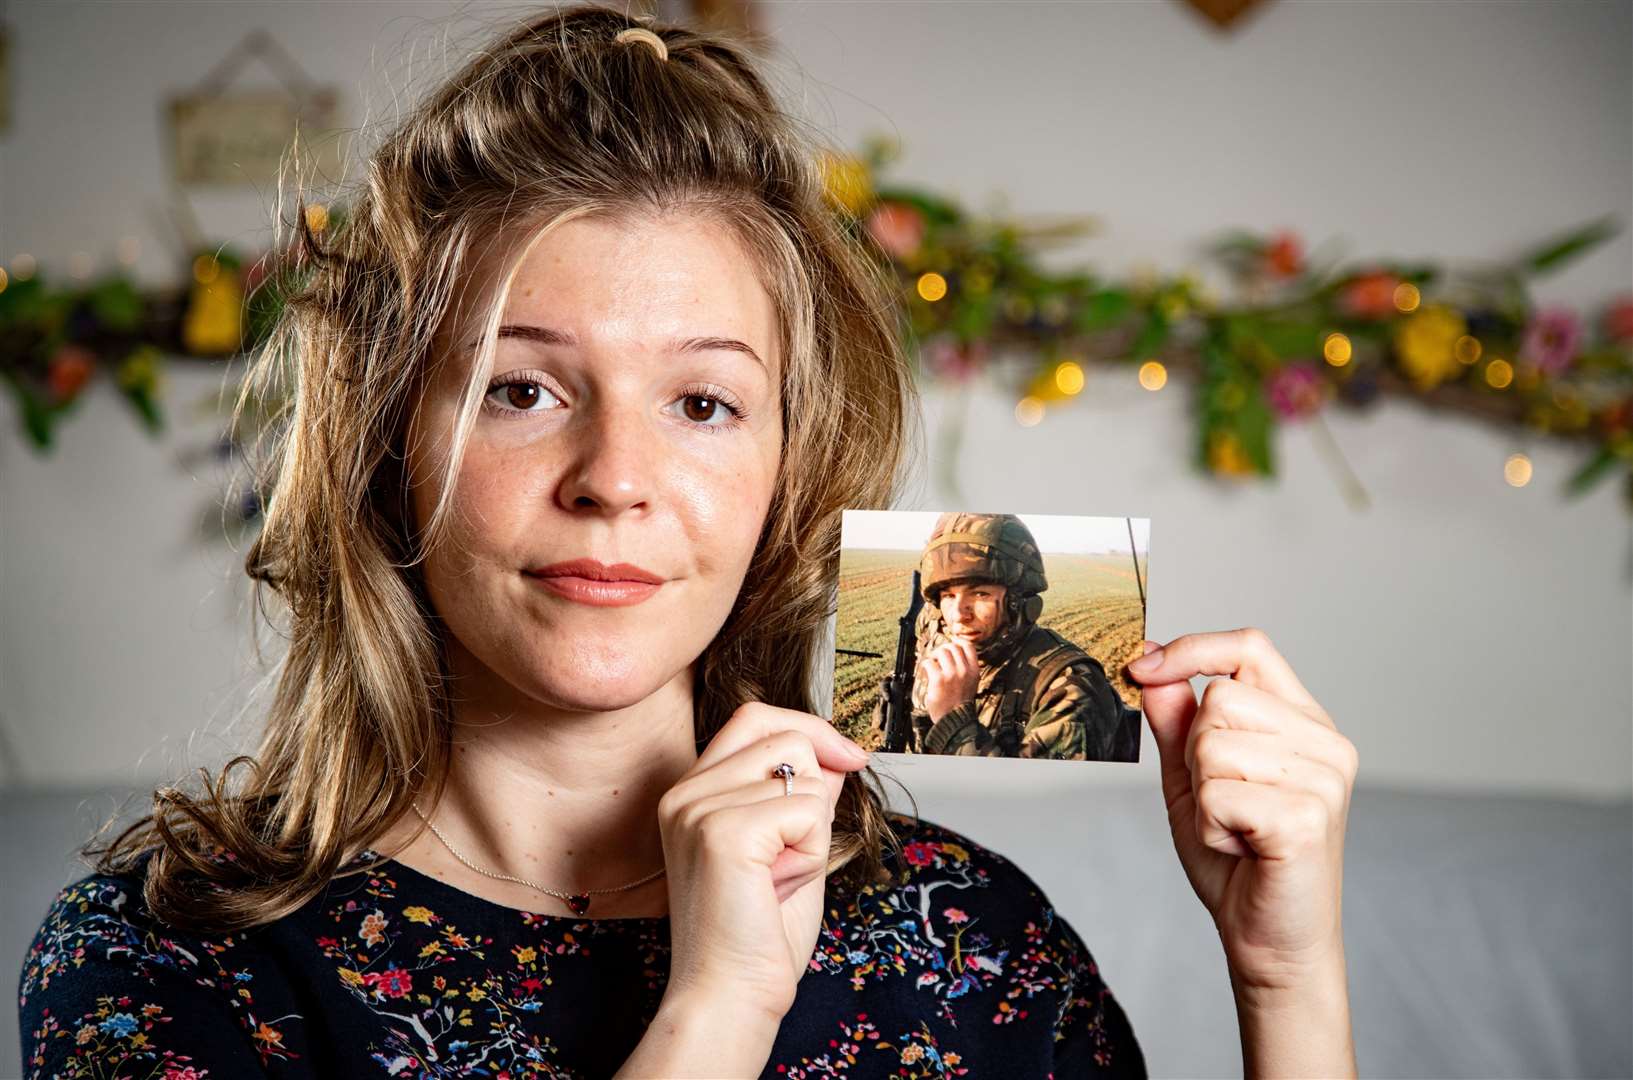 Stephanie holding up a photo of Mark whilst he was Staff Sergeant in the Royal Artillery, taken in Northern Ireland. Picture: SWNS